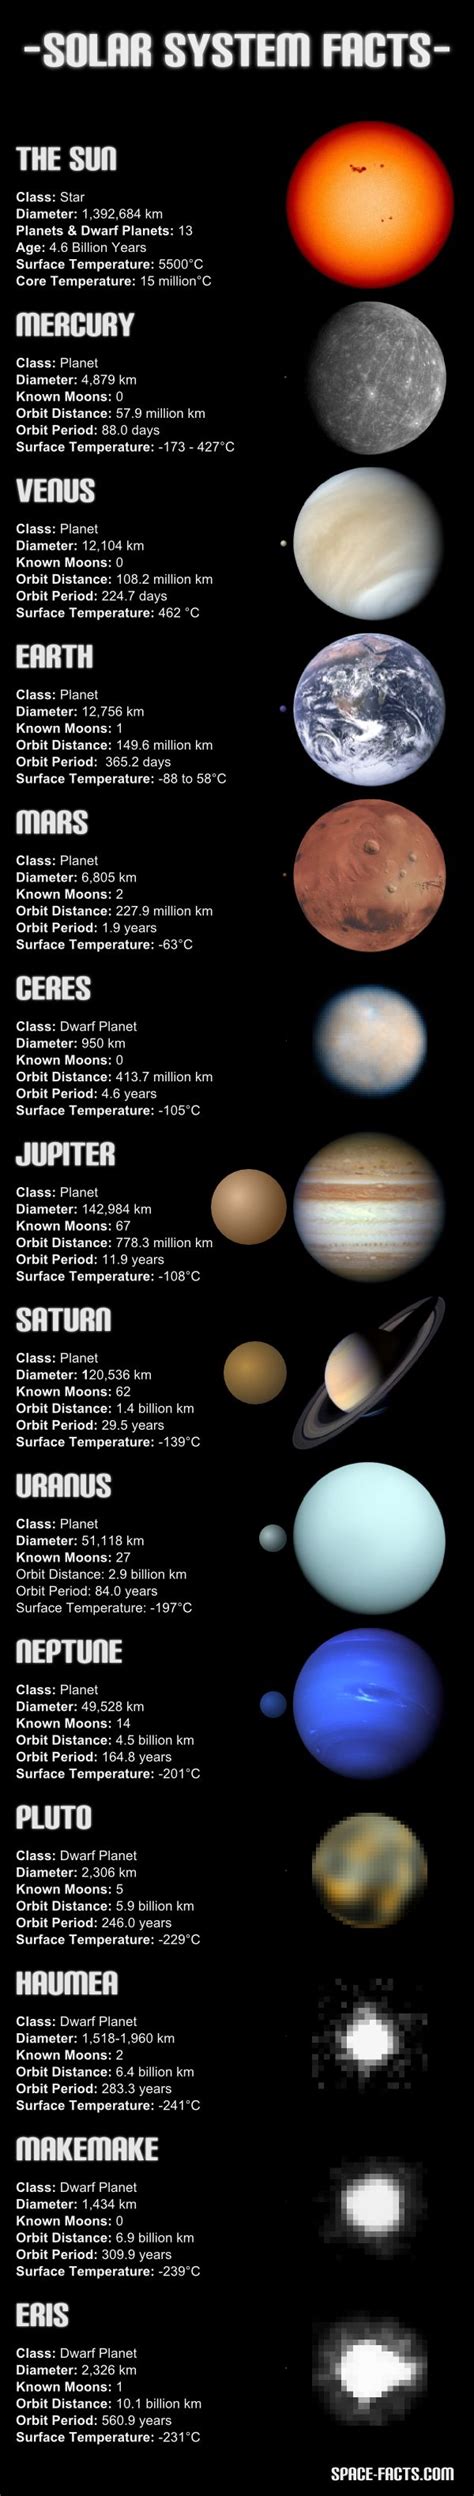 Information on the Sun, planets and dwarf planets in the ...